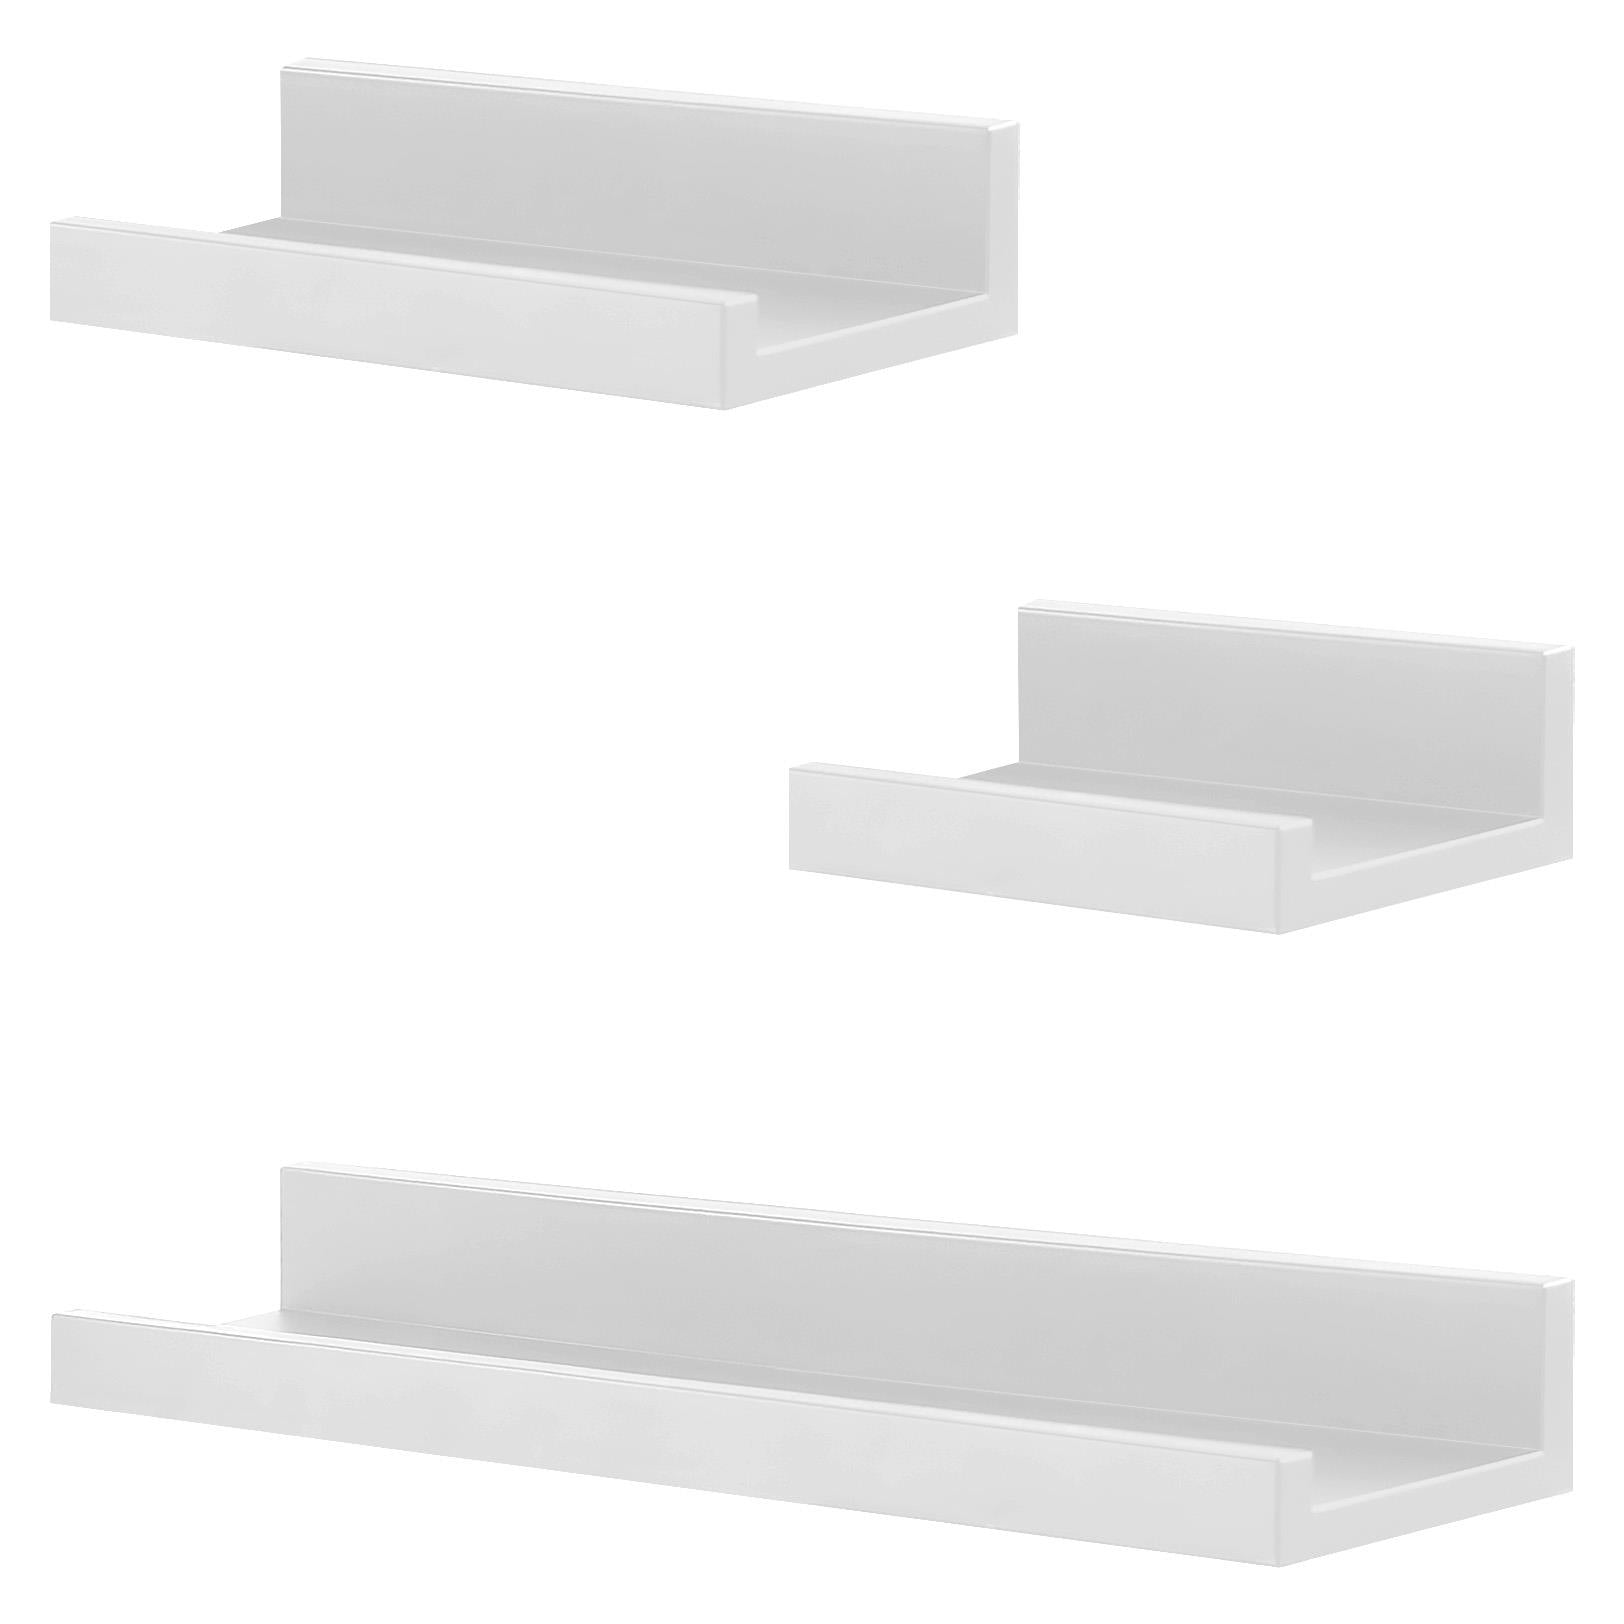 White Floating Wall Shelves Set of 3 by GEEZY - UKBuyZone